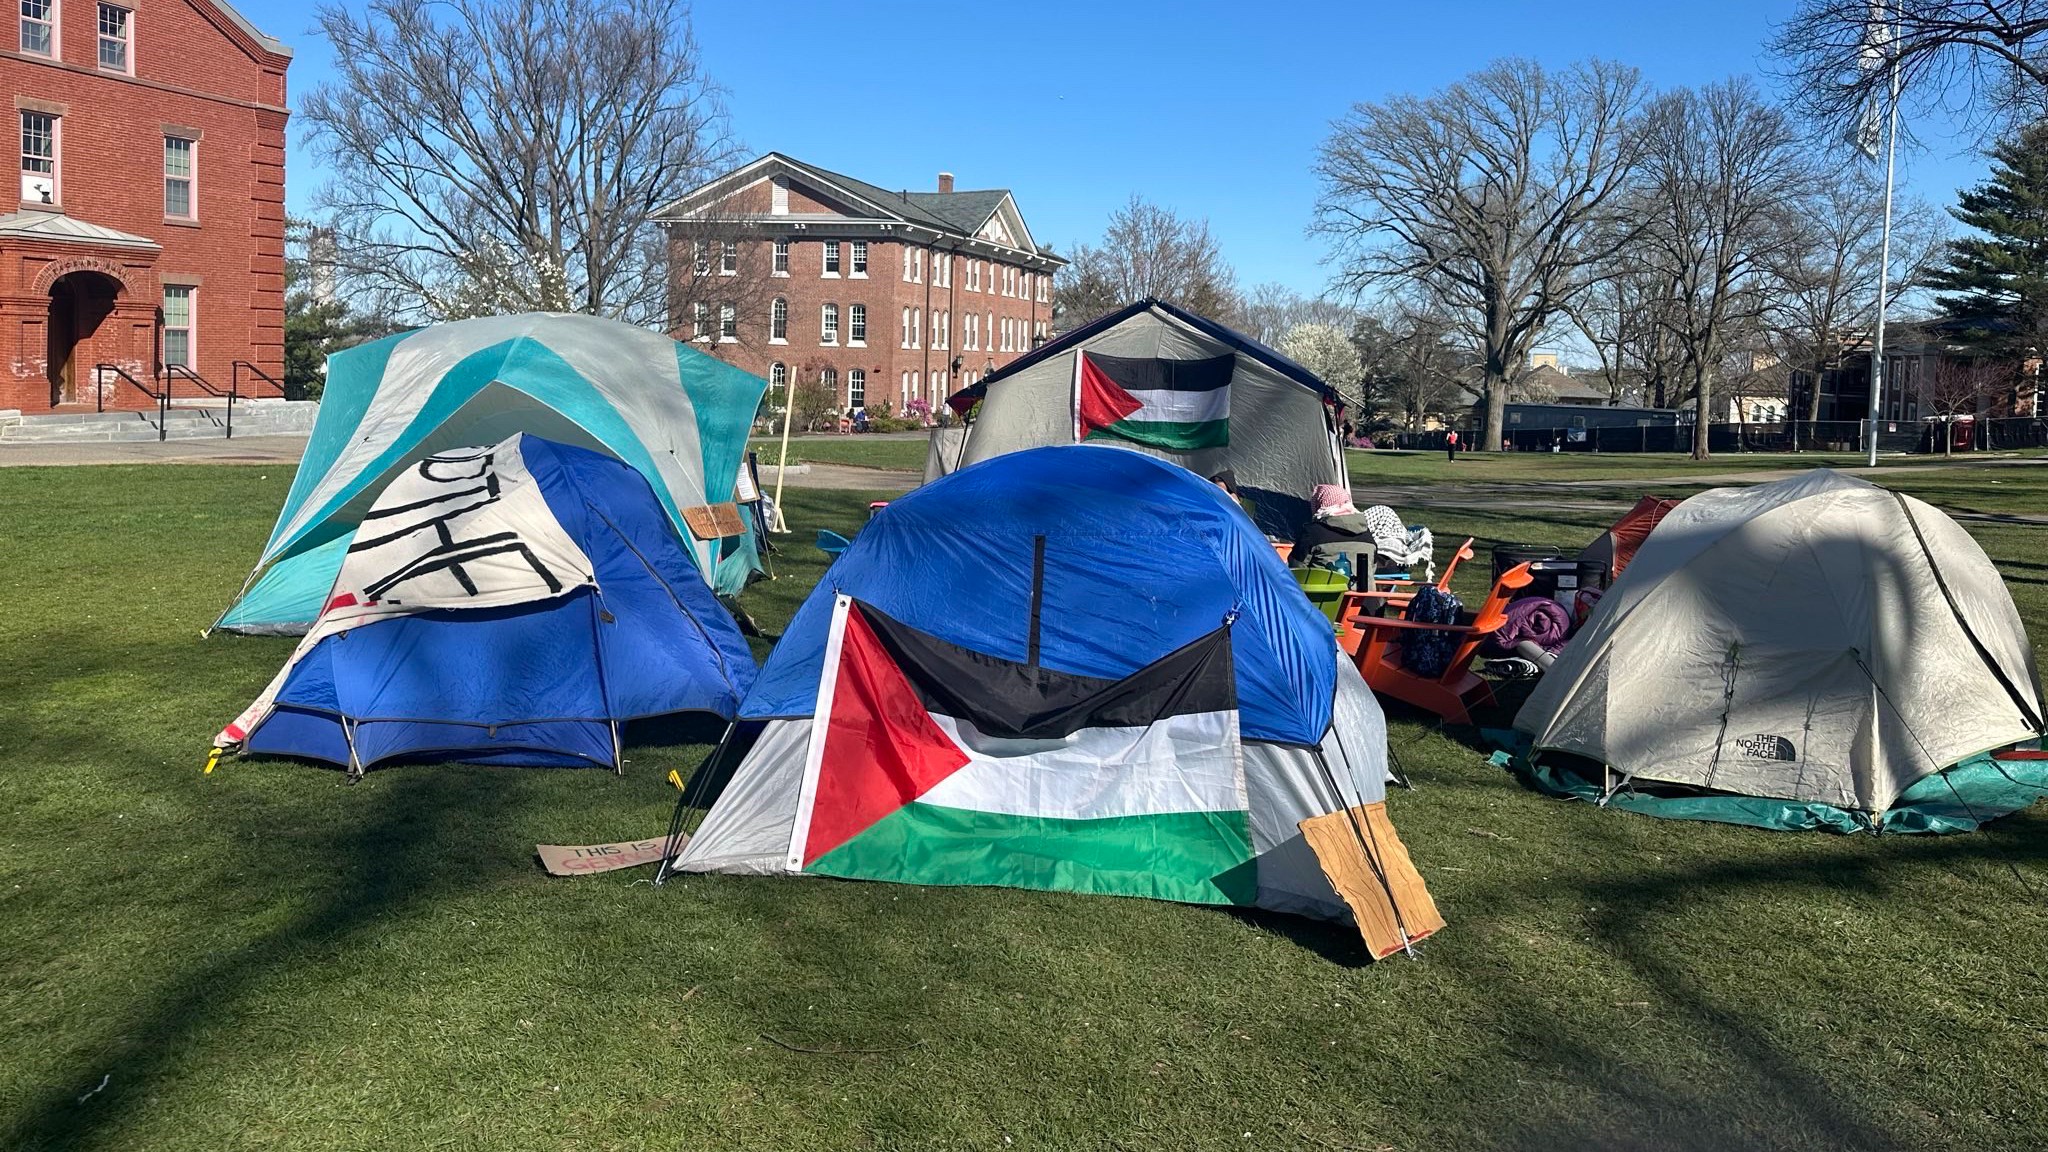 Tufts along with Emerson College and MIT have launched their own encampments (MEE/Supplied)